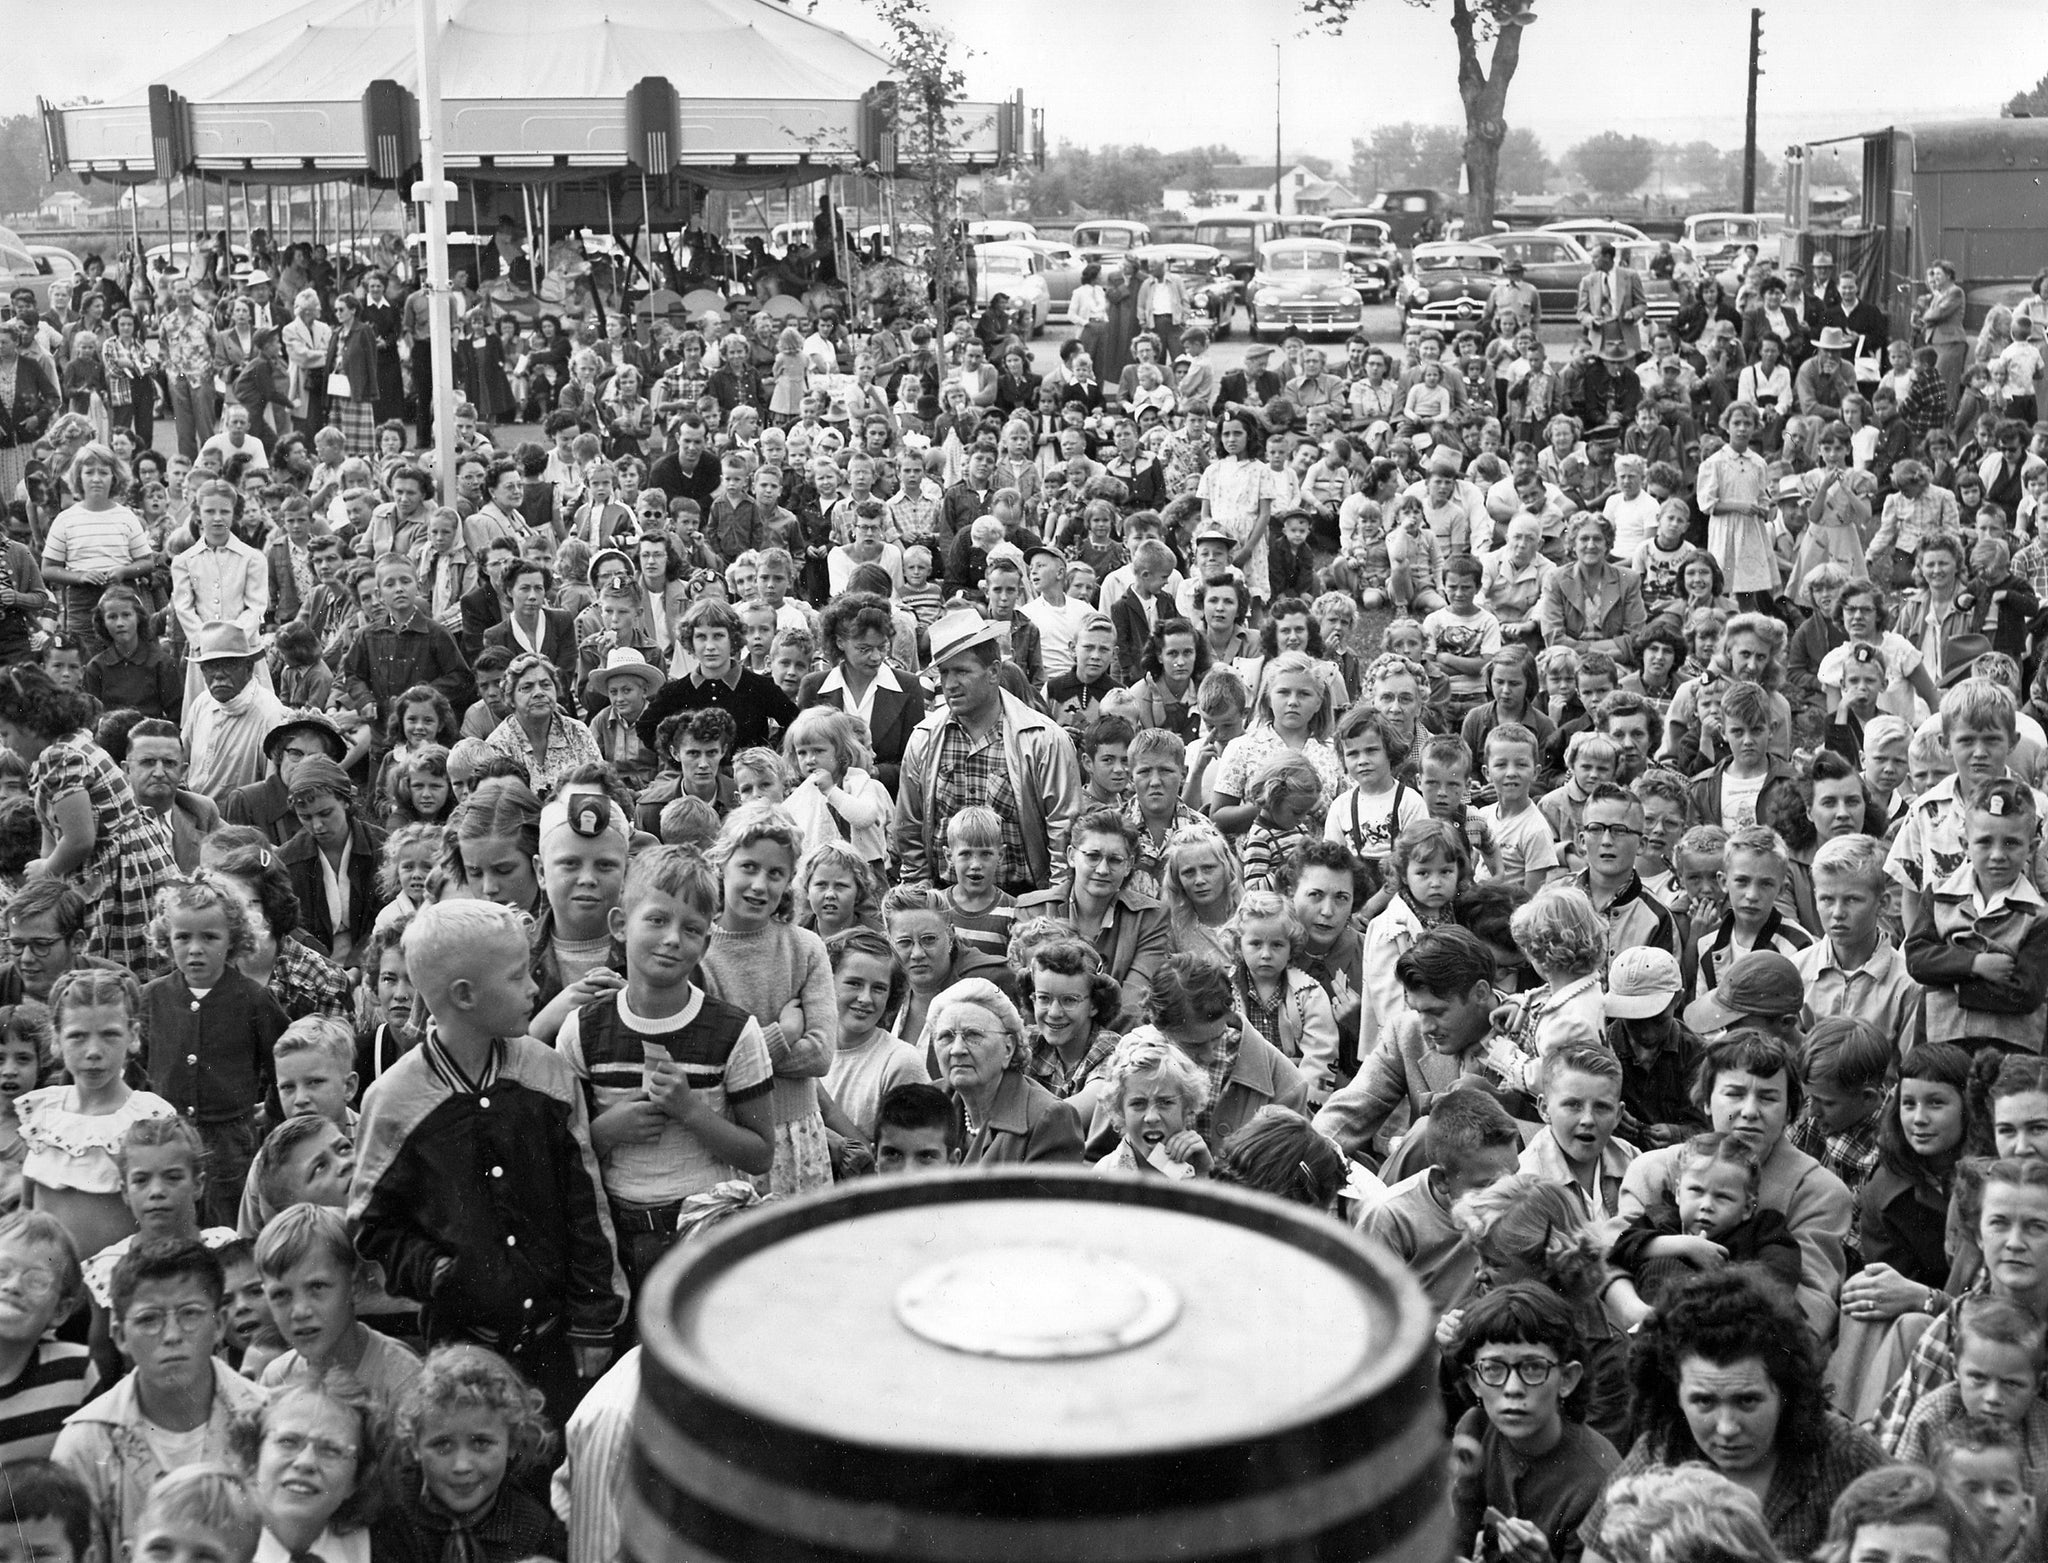 The crowd for Bozo Day at Wonderland amusement park, 1954. Bozo "the Capitol Clown," known at the time for his best-selling children's records on Capitol Records, was featured at Wonderland for special events. -- Foote Collection, Western Heritage Center